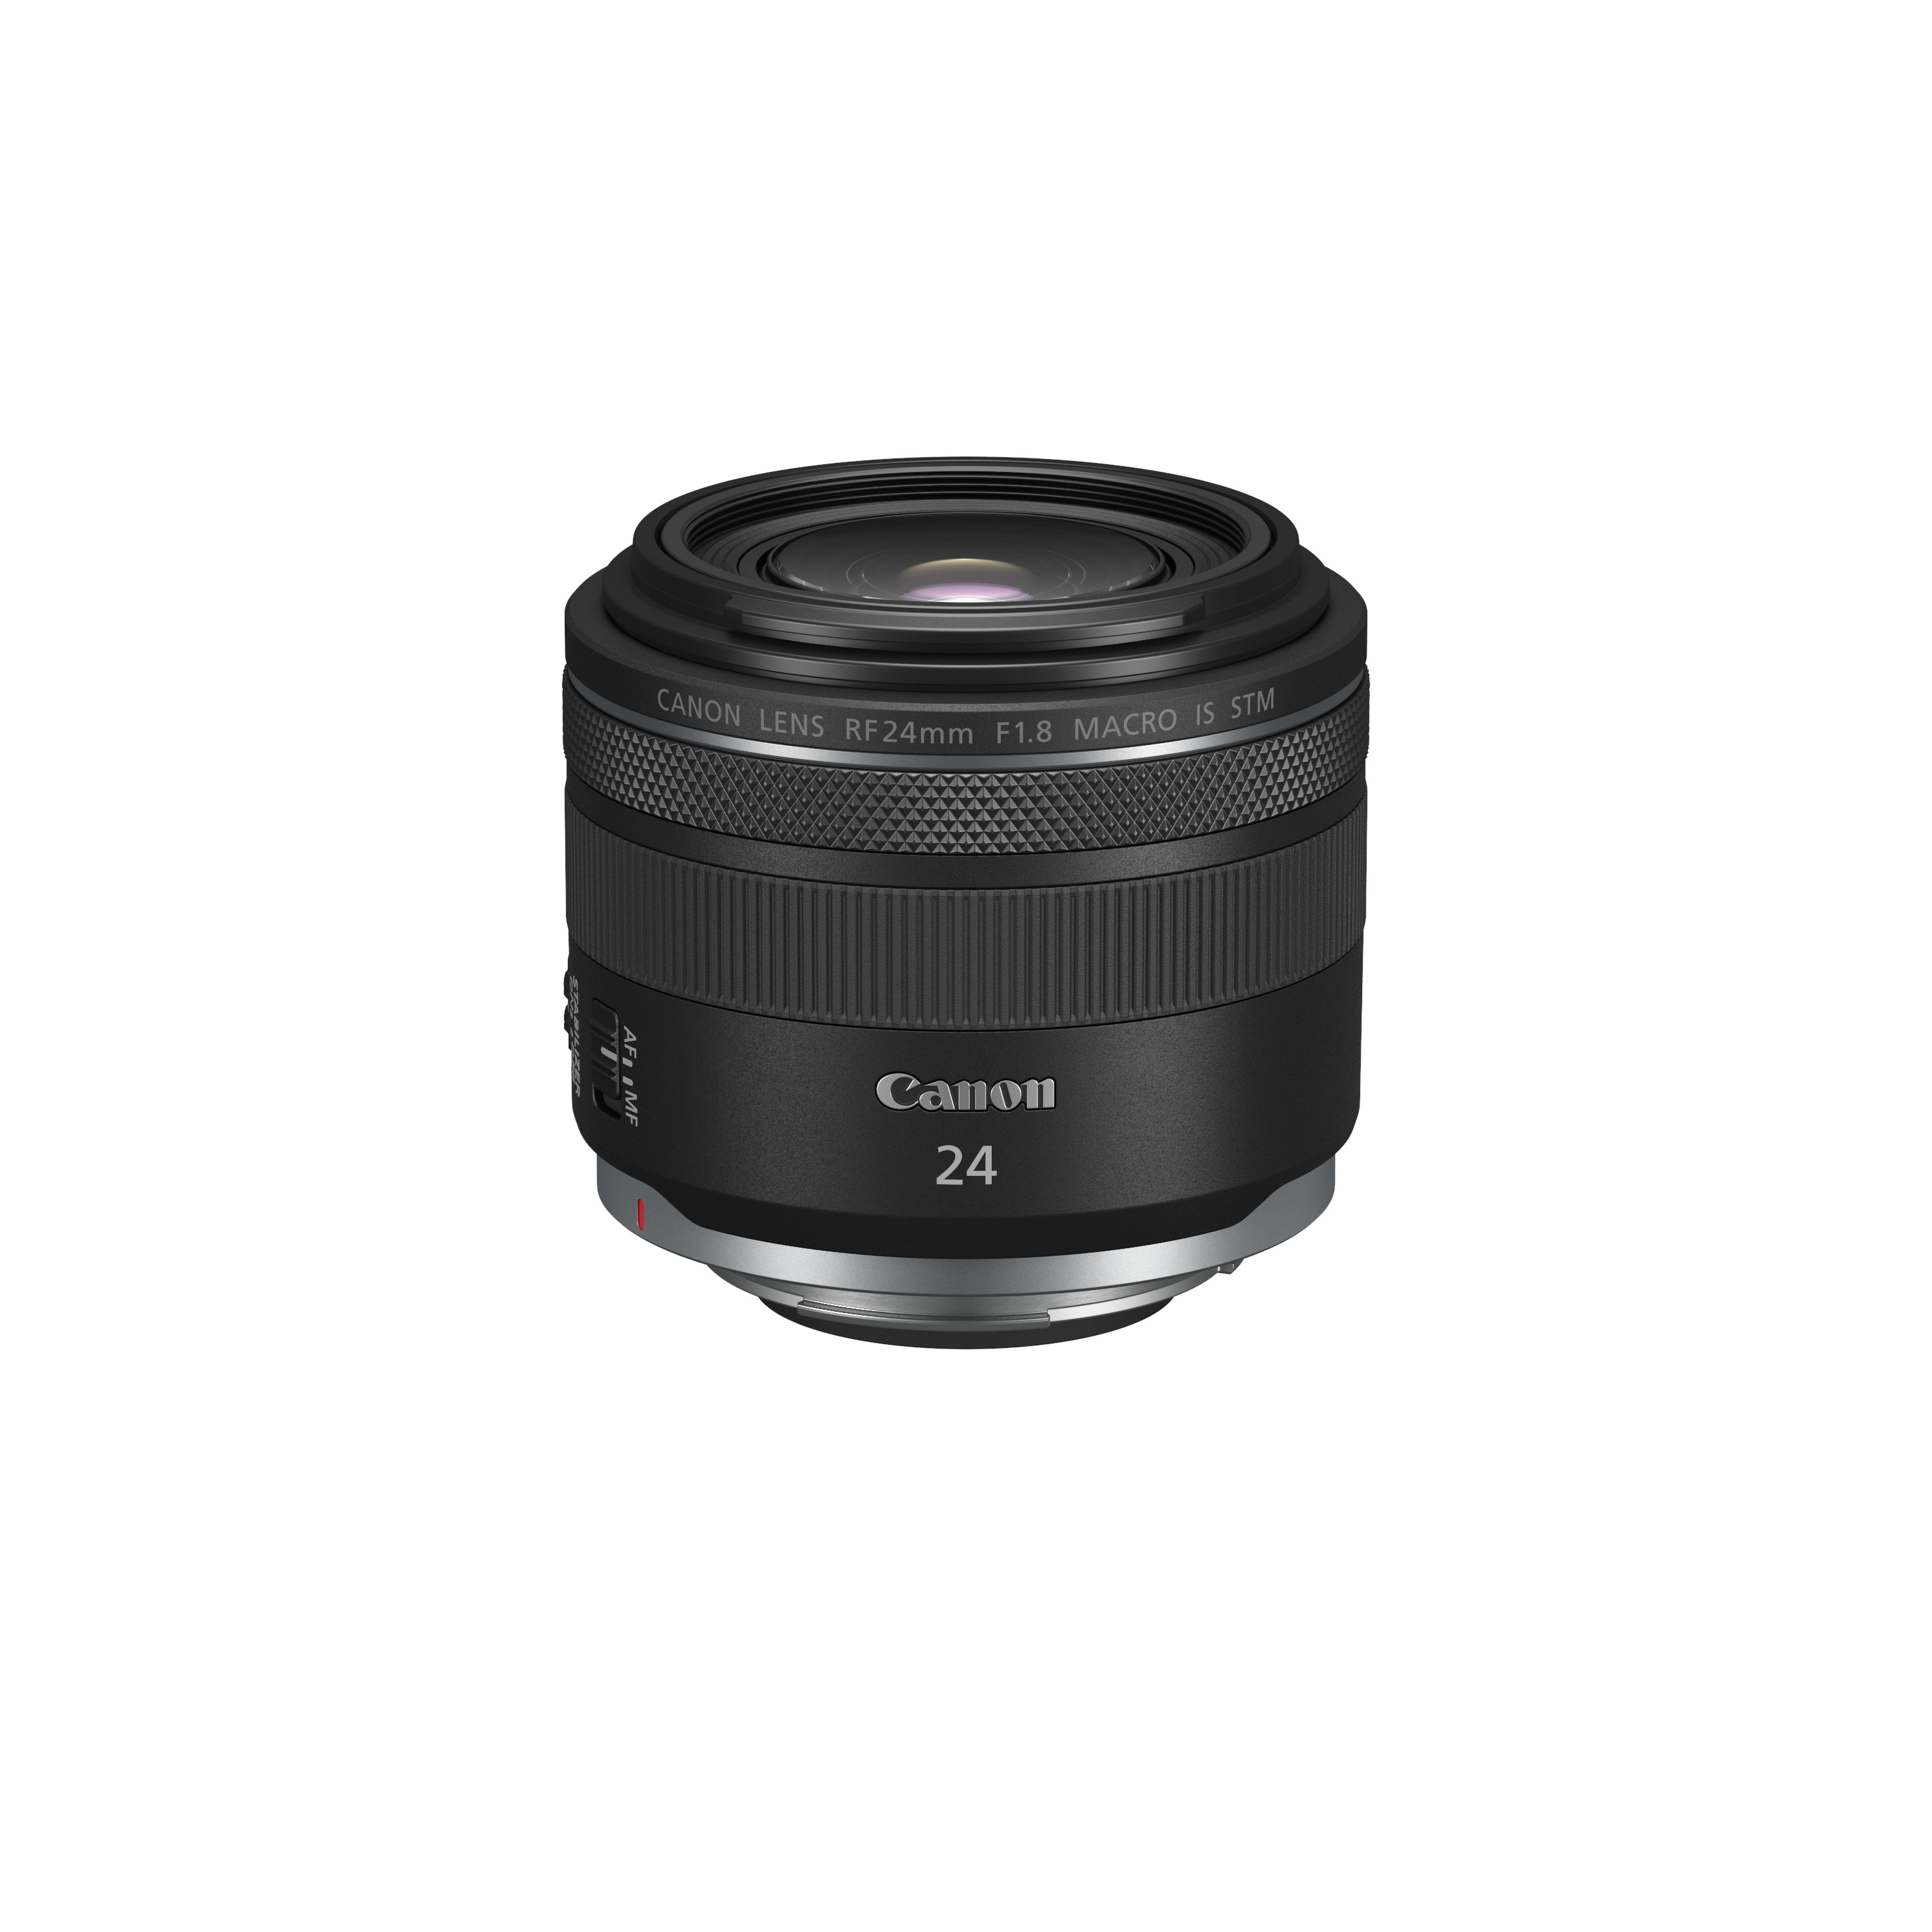 Canon RF 24mm F1.8 MACRO IS STM MILC Bred zoomlinse Sort